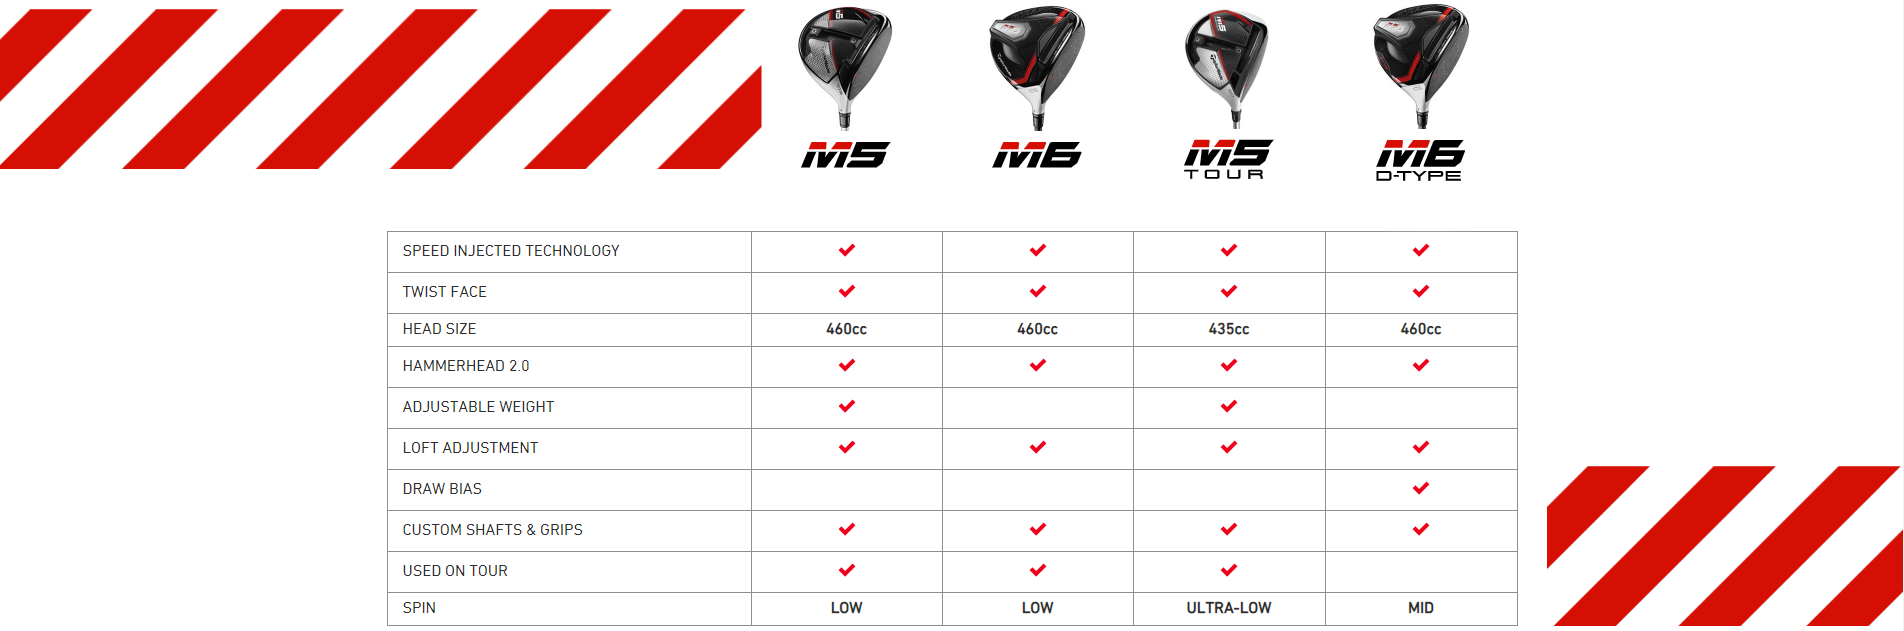 TaylorMade M5/M6 Drivers | PGA TOUR Superstore